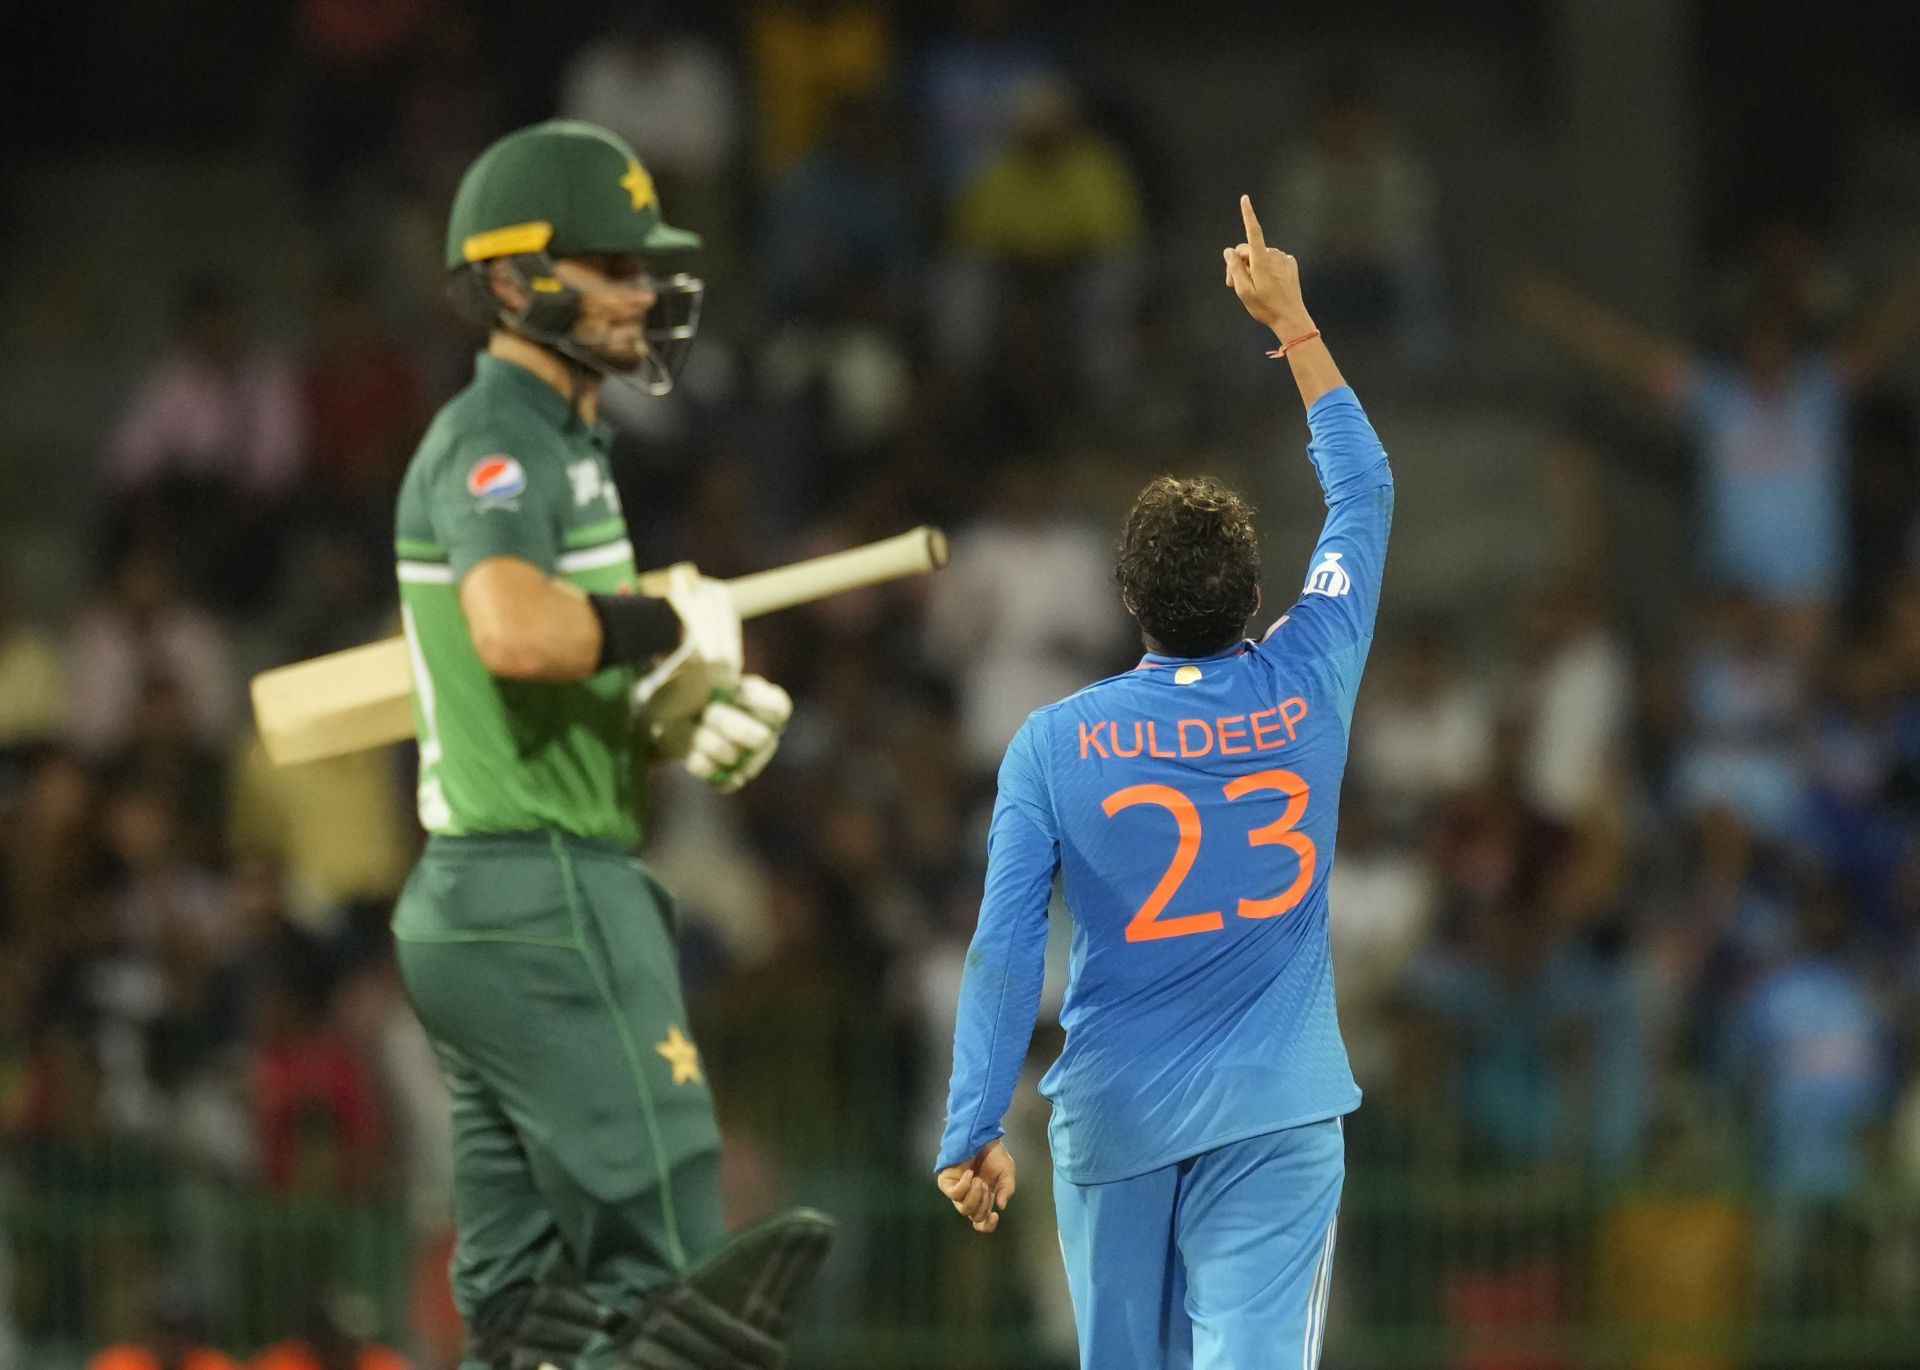 Kuldeep Yadav dismissed Faheem Ashraf for 4 to complete his five-wicket haul and bowl India to a record win against Pakistan. (Pic: AP Photo)